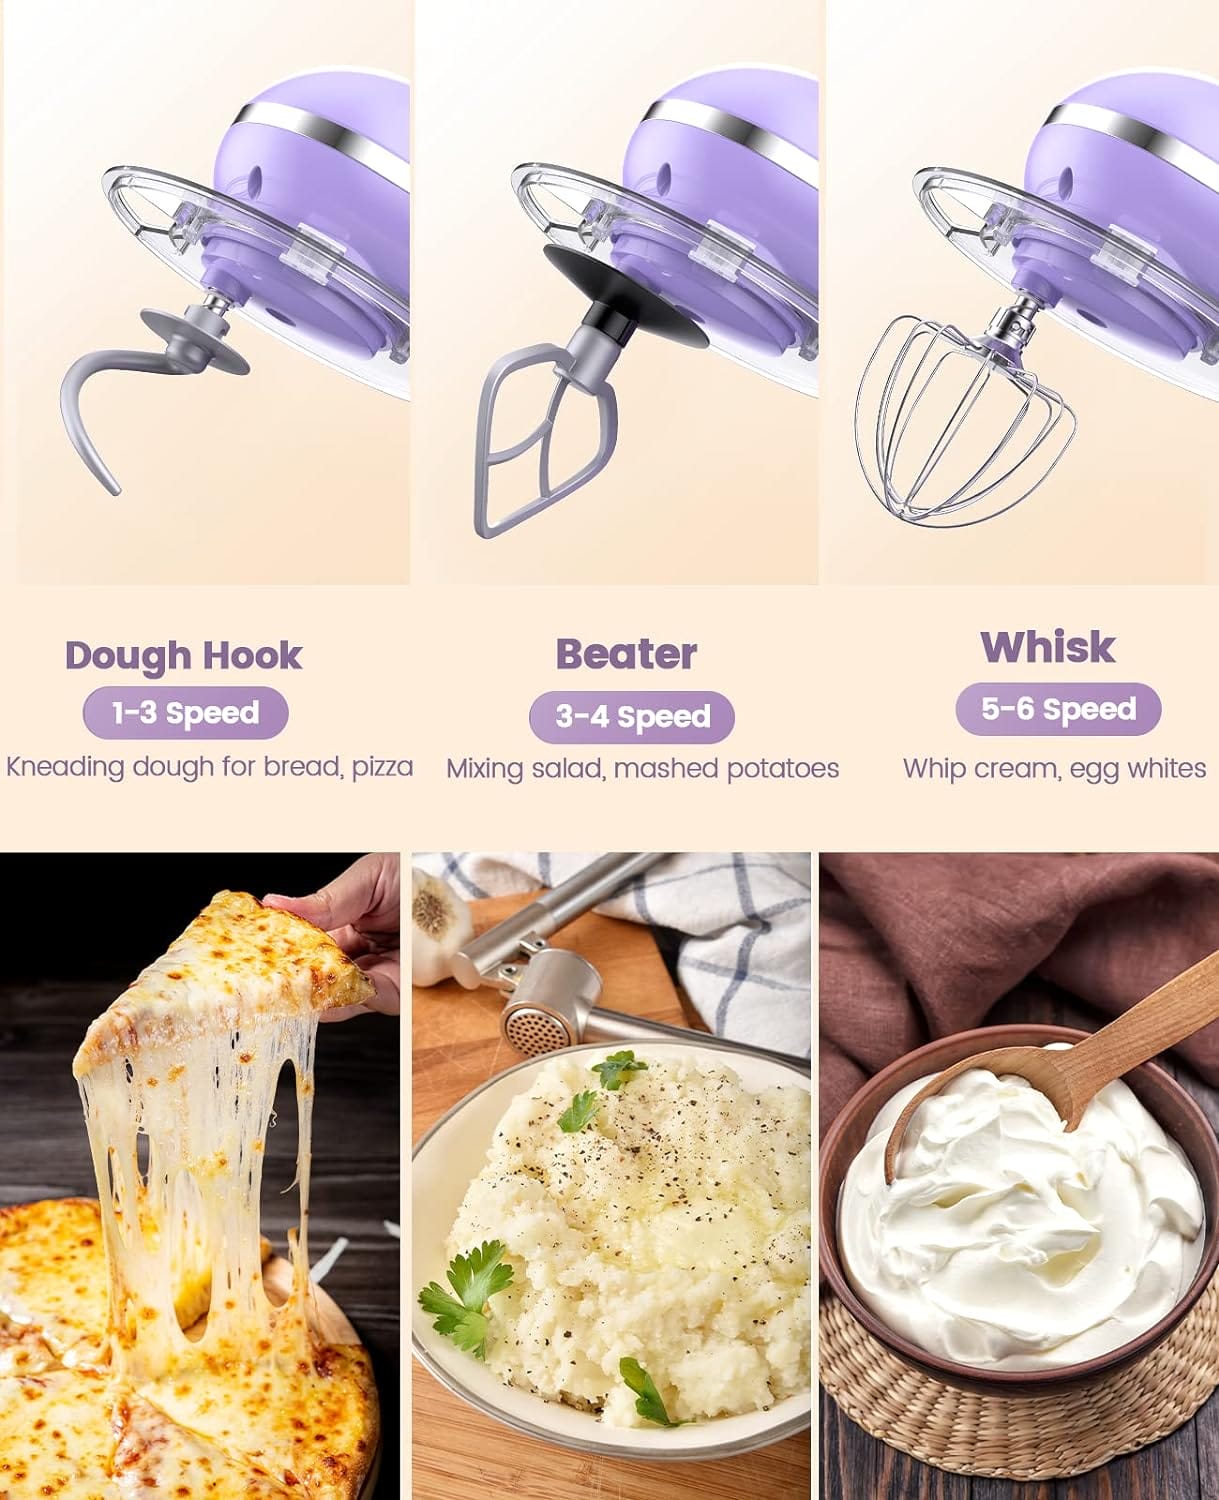 CHeflee Stand Mixer, 6 Quart, 600W 6+P Speed Household Electric Food Mixer with 6 Accessories for Dough, Cream, Cake, Kitchen Electric Mixer, Lavender